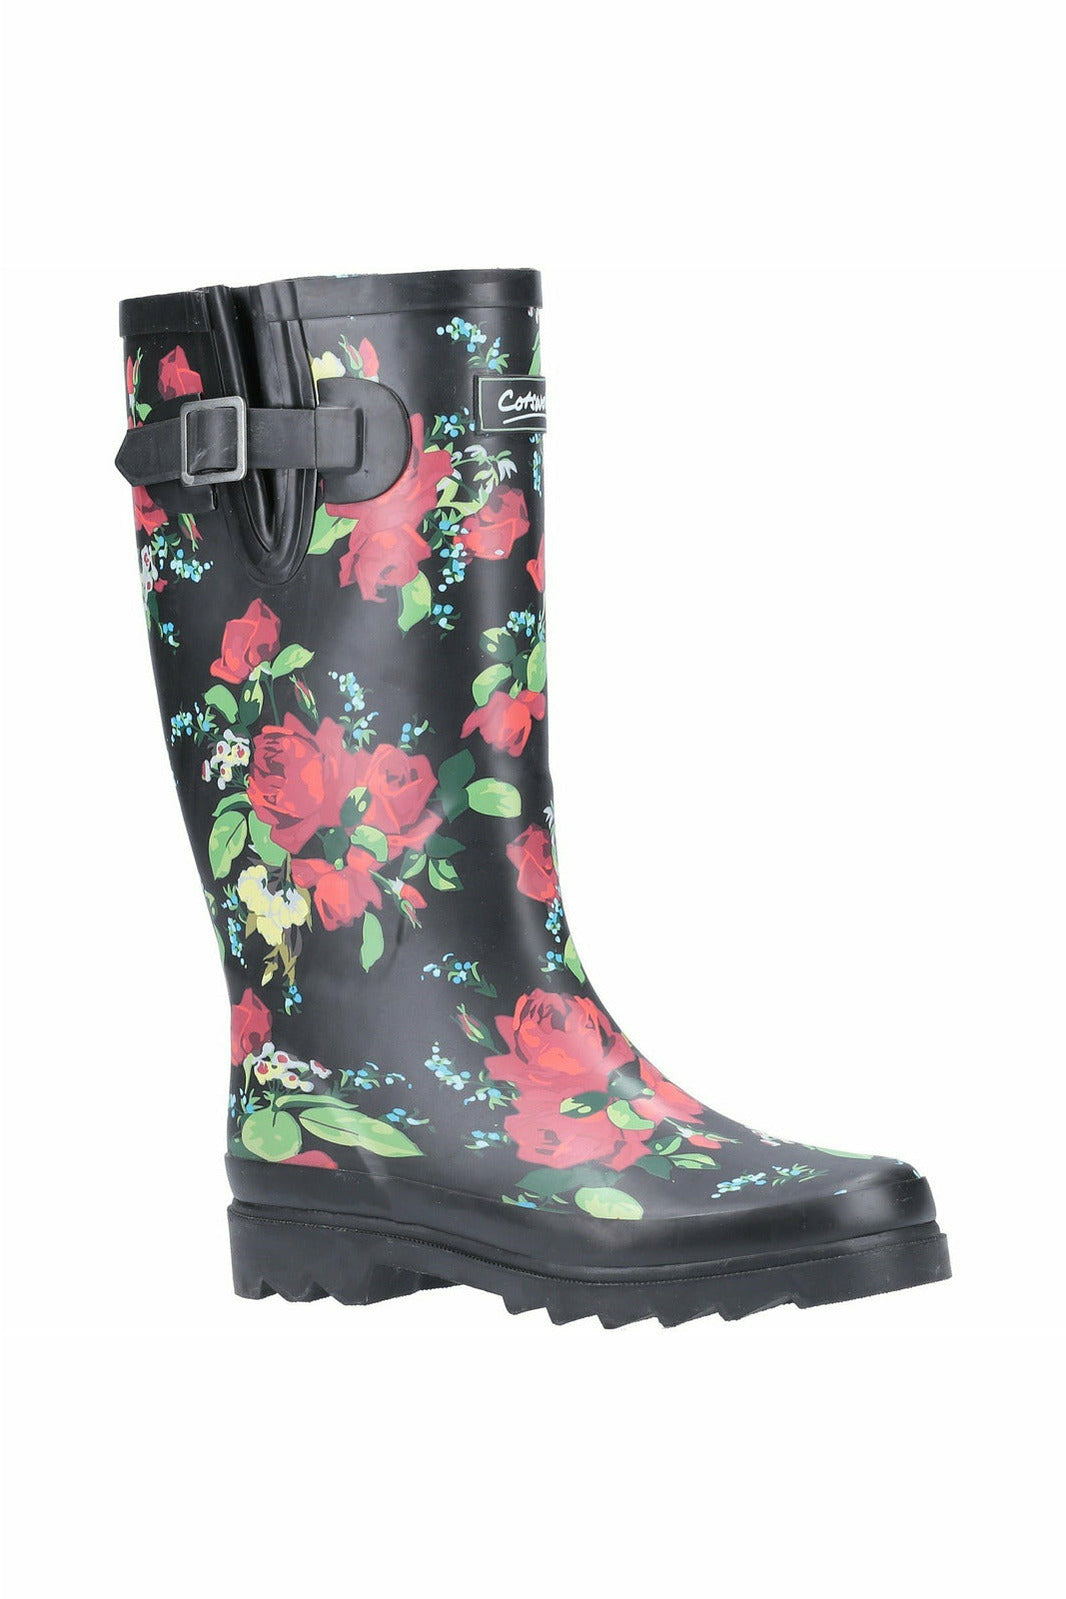 Cotswold - Blossom Ladies luxury Welly